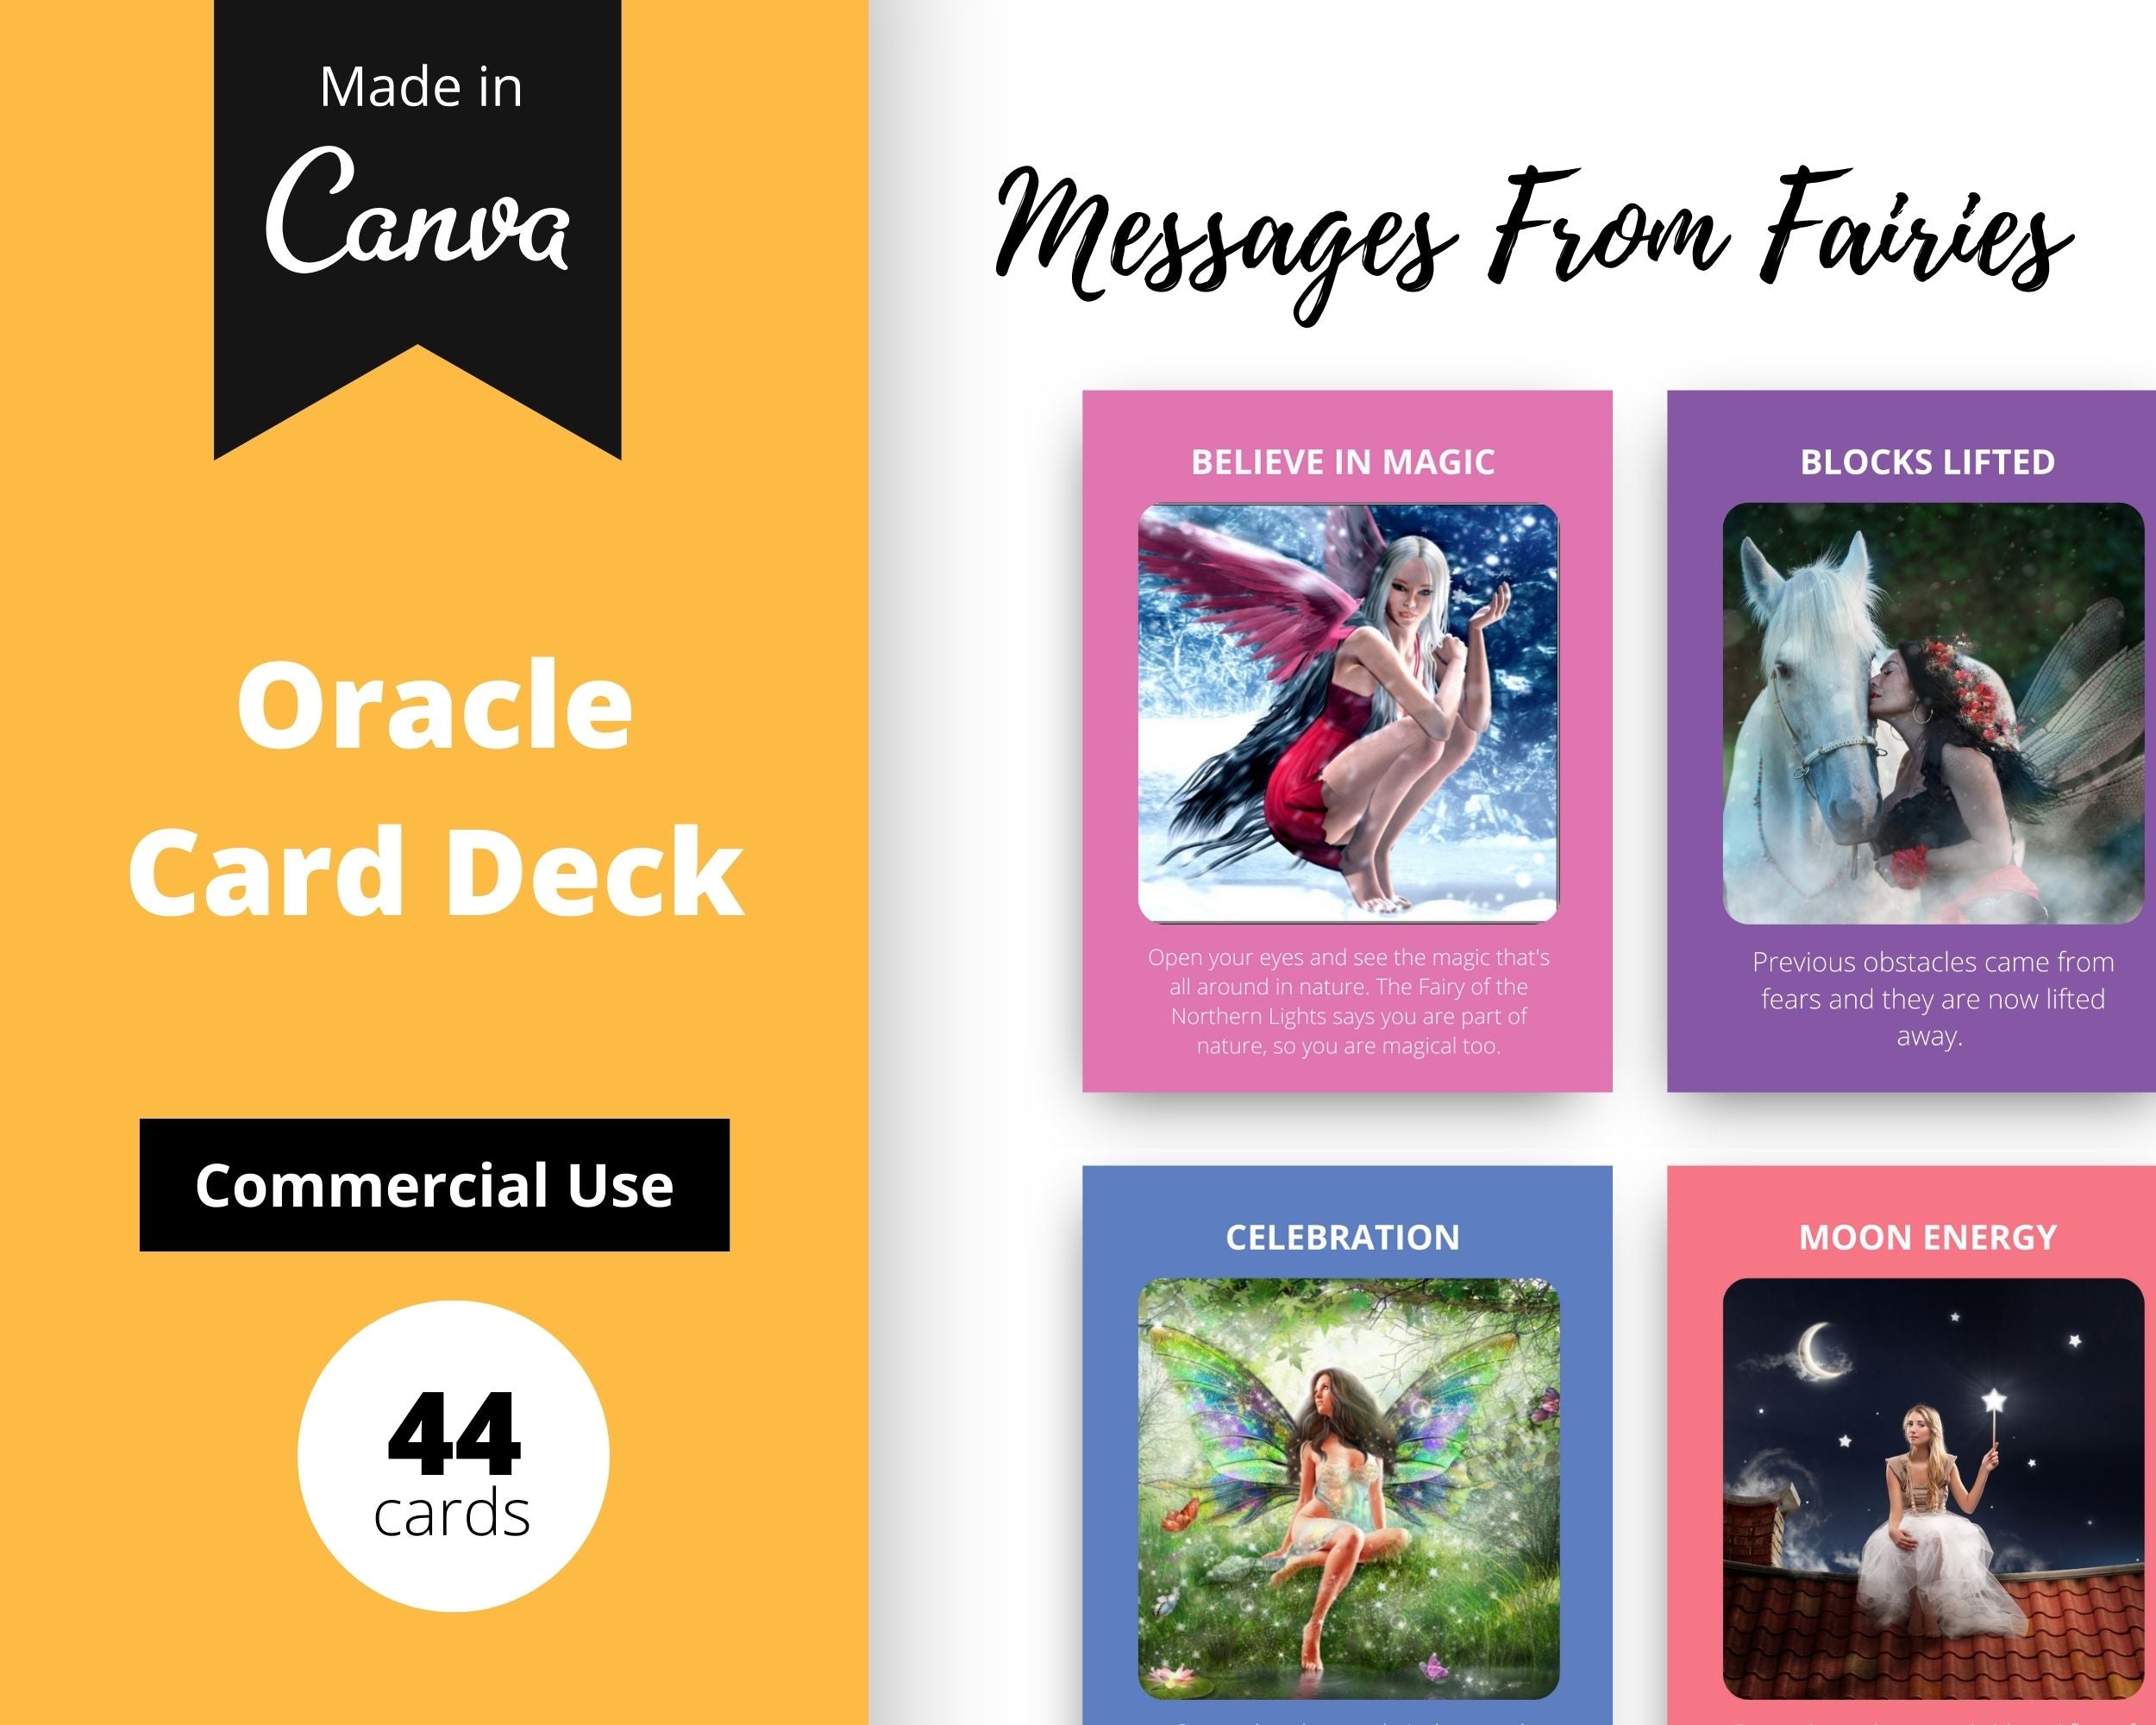 Messages from Fairies Oracle Card Deck | Editable 44 Card Deck in Canva | Size 3"x 4" | Commercial Use